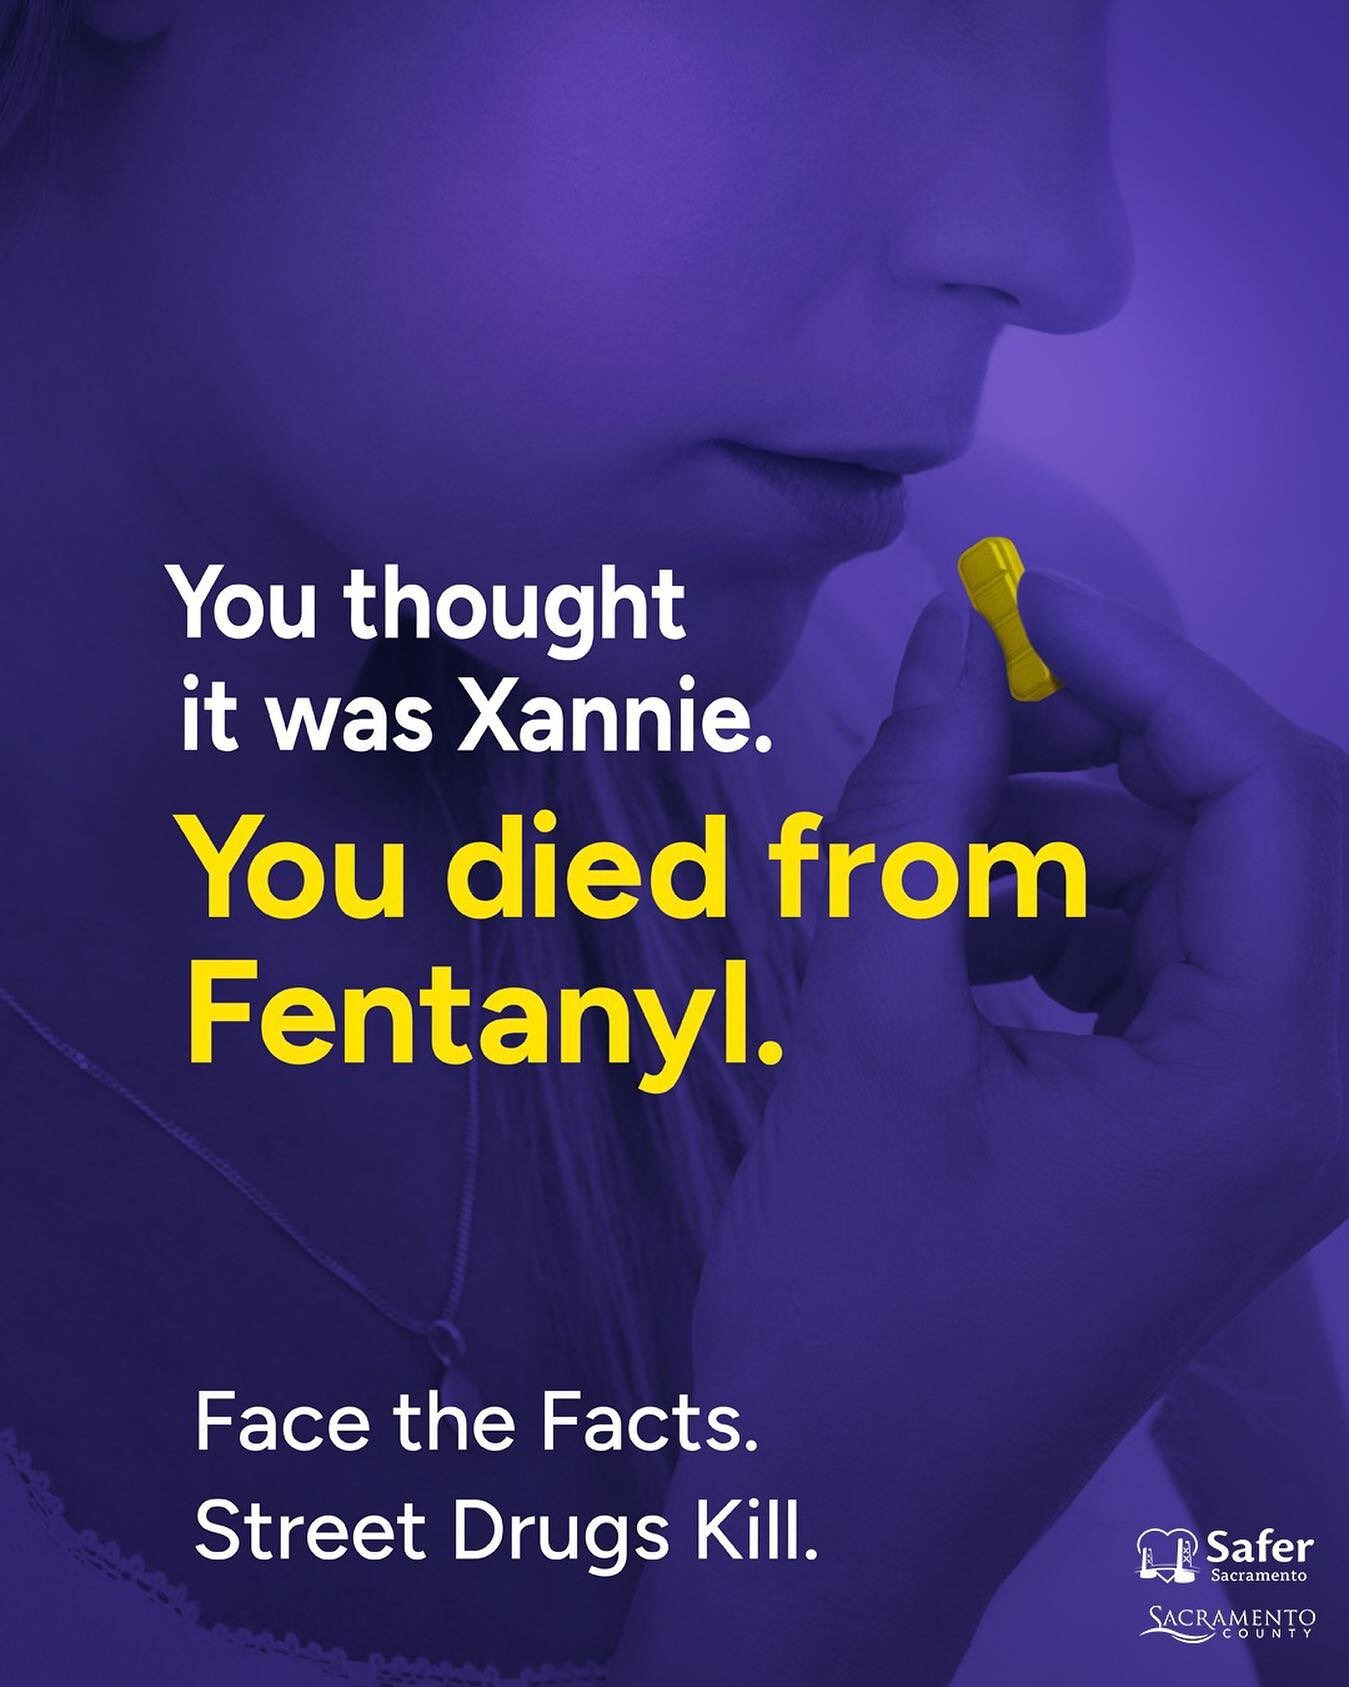 According to the Sacramento County DA Crime Lab, 98% of street drugs are fake, and 99% contain deadly fentanyl. Even if you're getting your drugs from a trusted source or friend, chances are they don't know what's in them.

#StreetDrugsKill. Learn mo